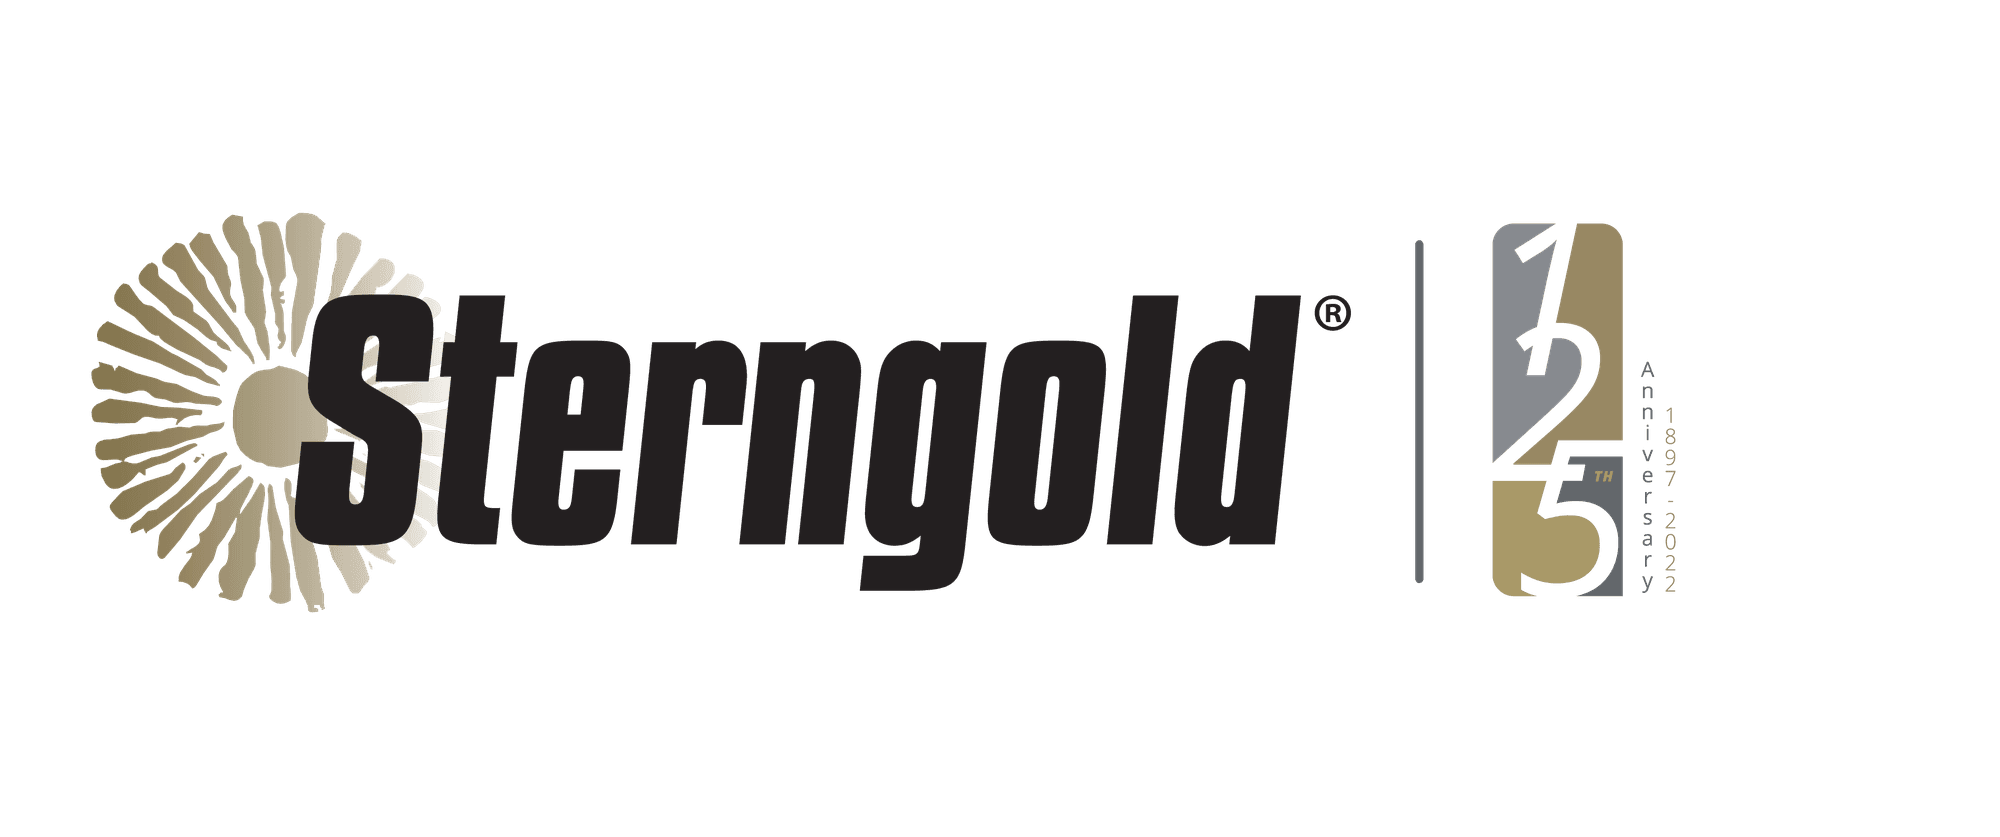 The Gilded Age: A Brief History of Sterngold Dental and the Dental Industry